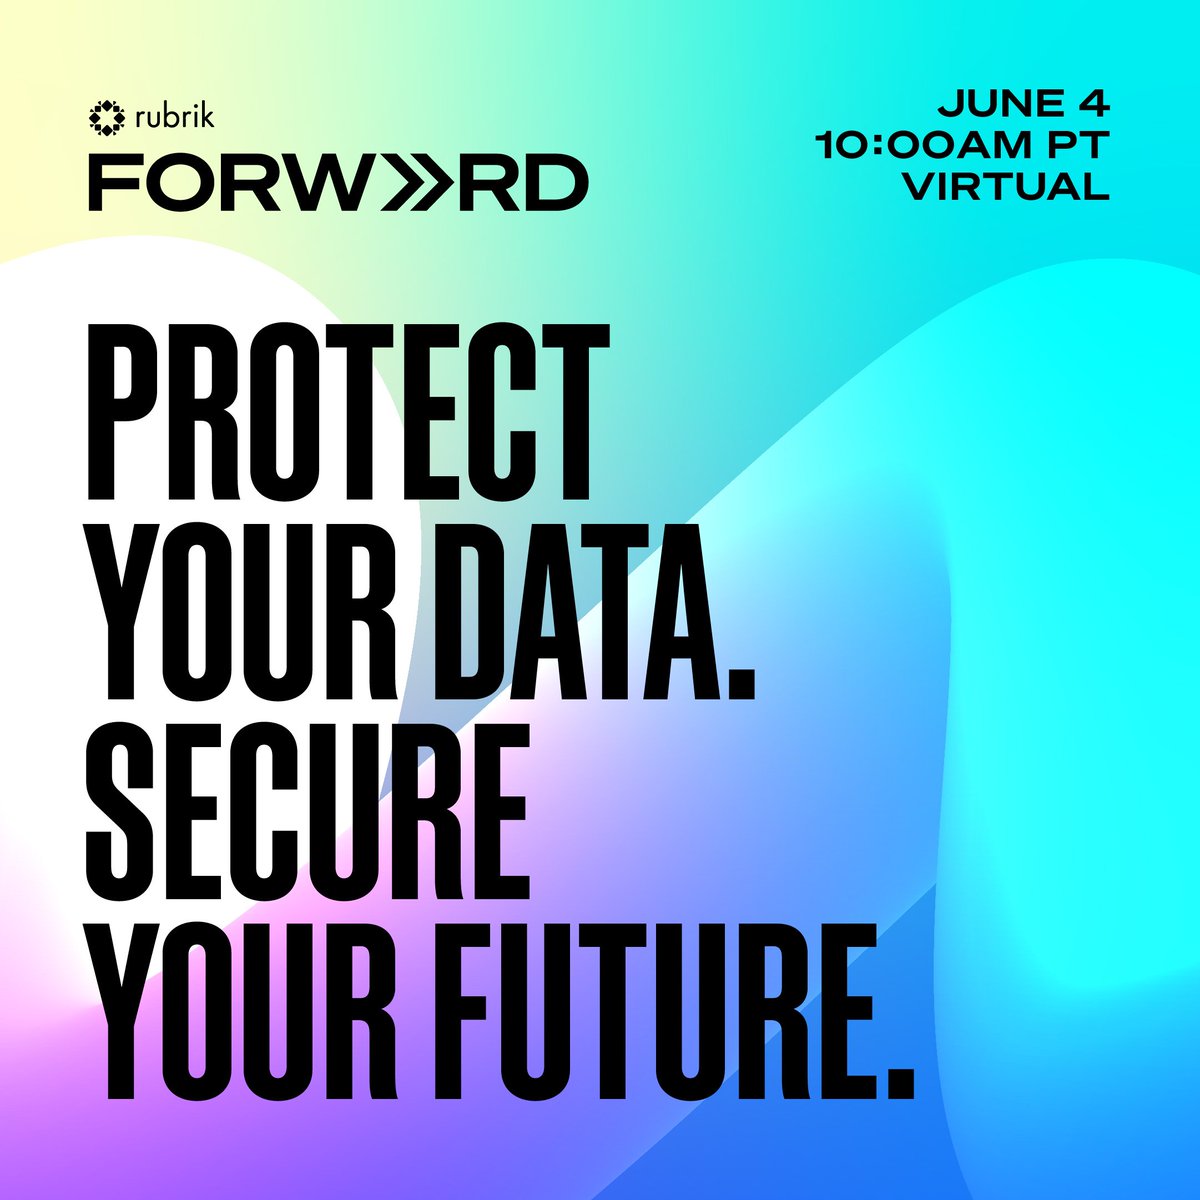 I couldn’t be more excited for #RubrikFORWARD this year! @RubrikInc is hosting THE #DataSecurity event of the year, and we’ll be diving into the technology and strategies you can deploy to achieve #CyberResilience at your org. Save your spot: rbrk.co/4azHnup